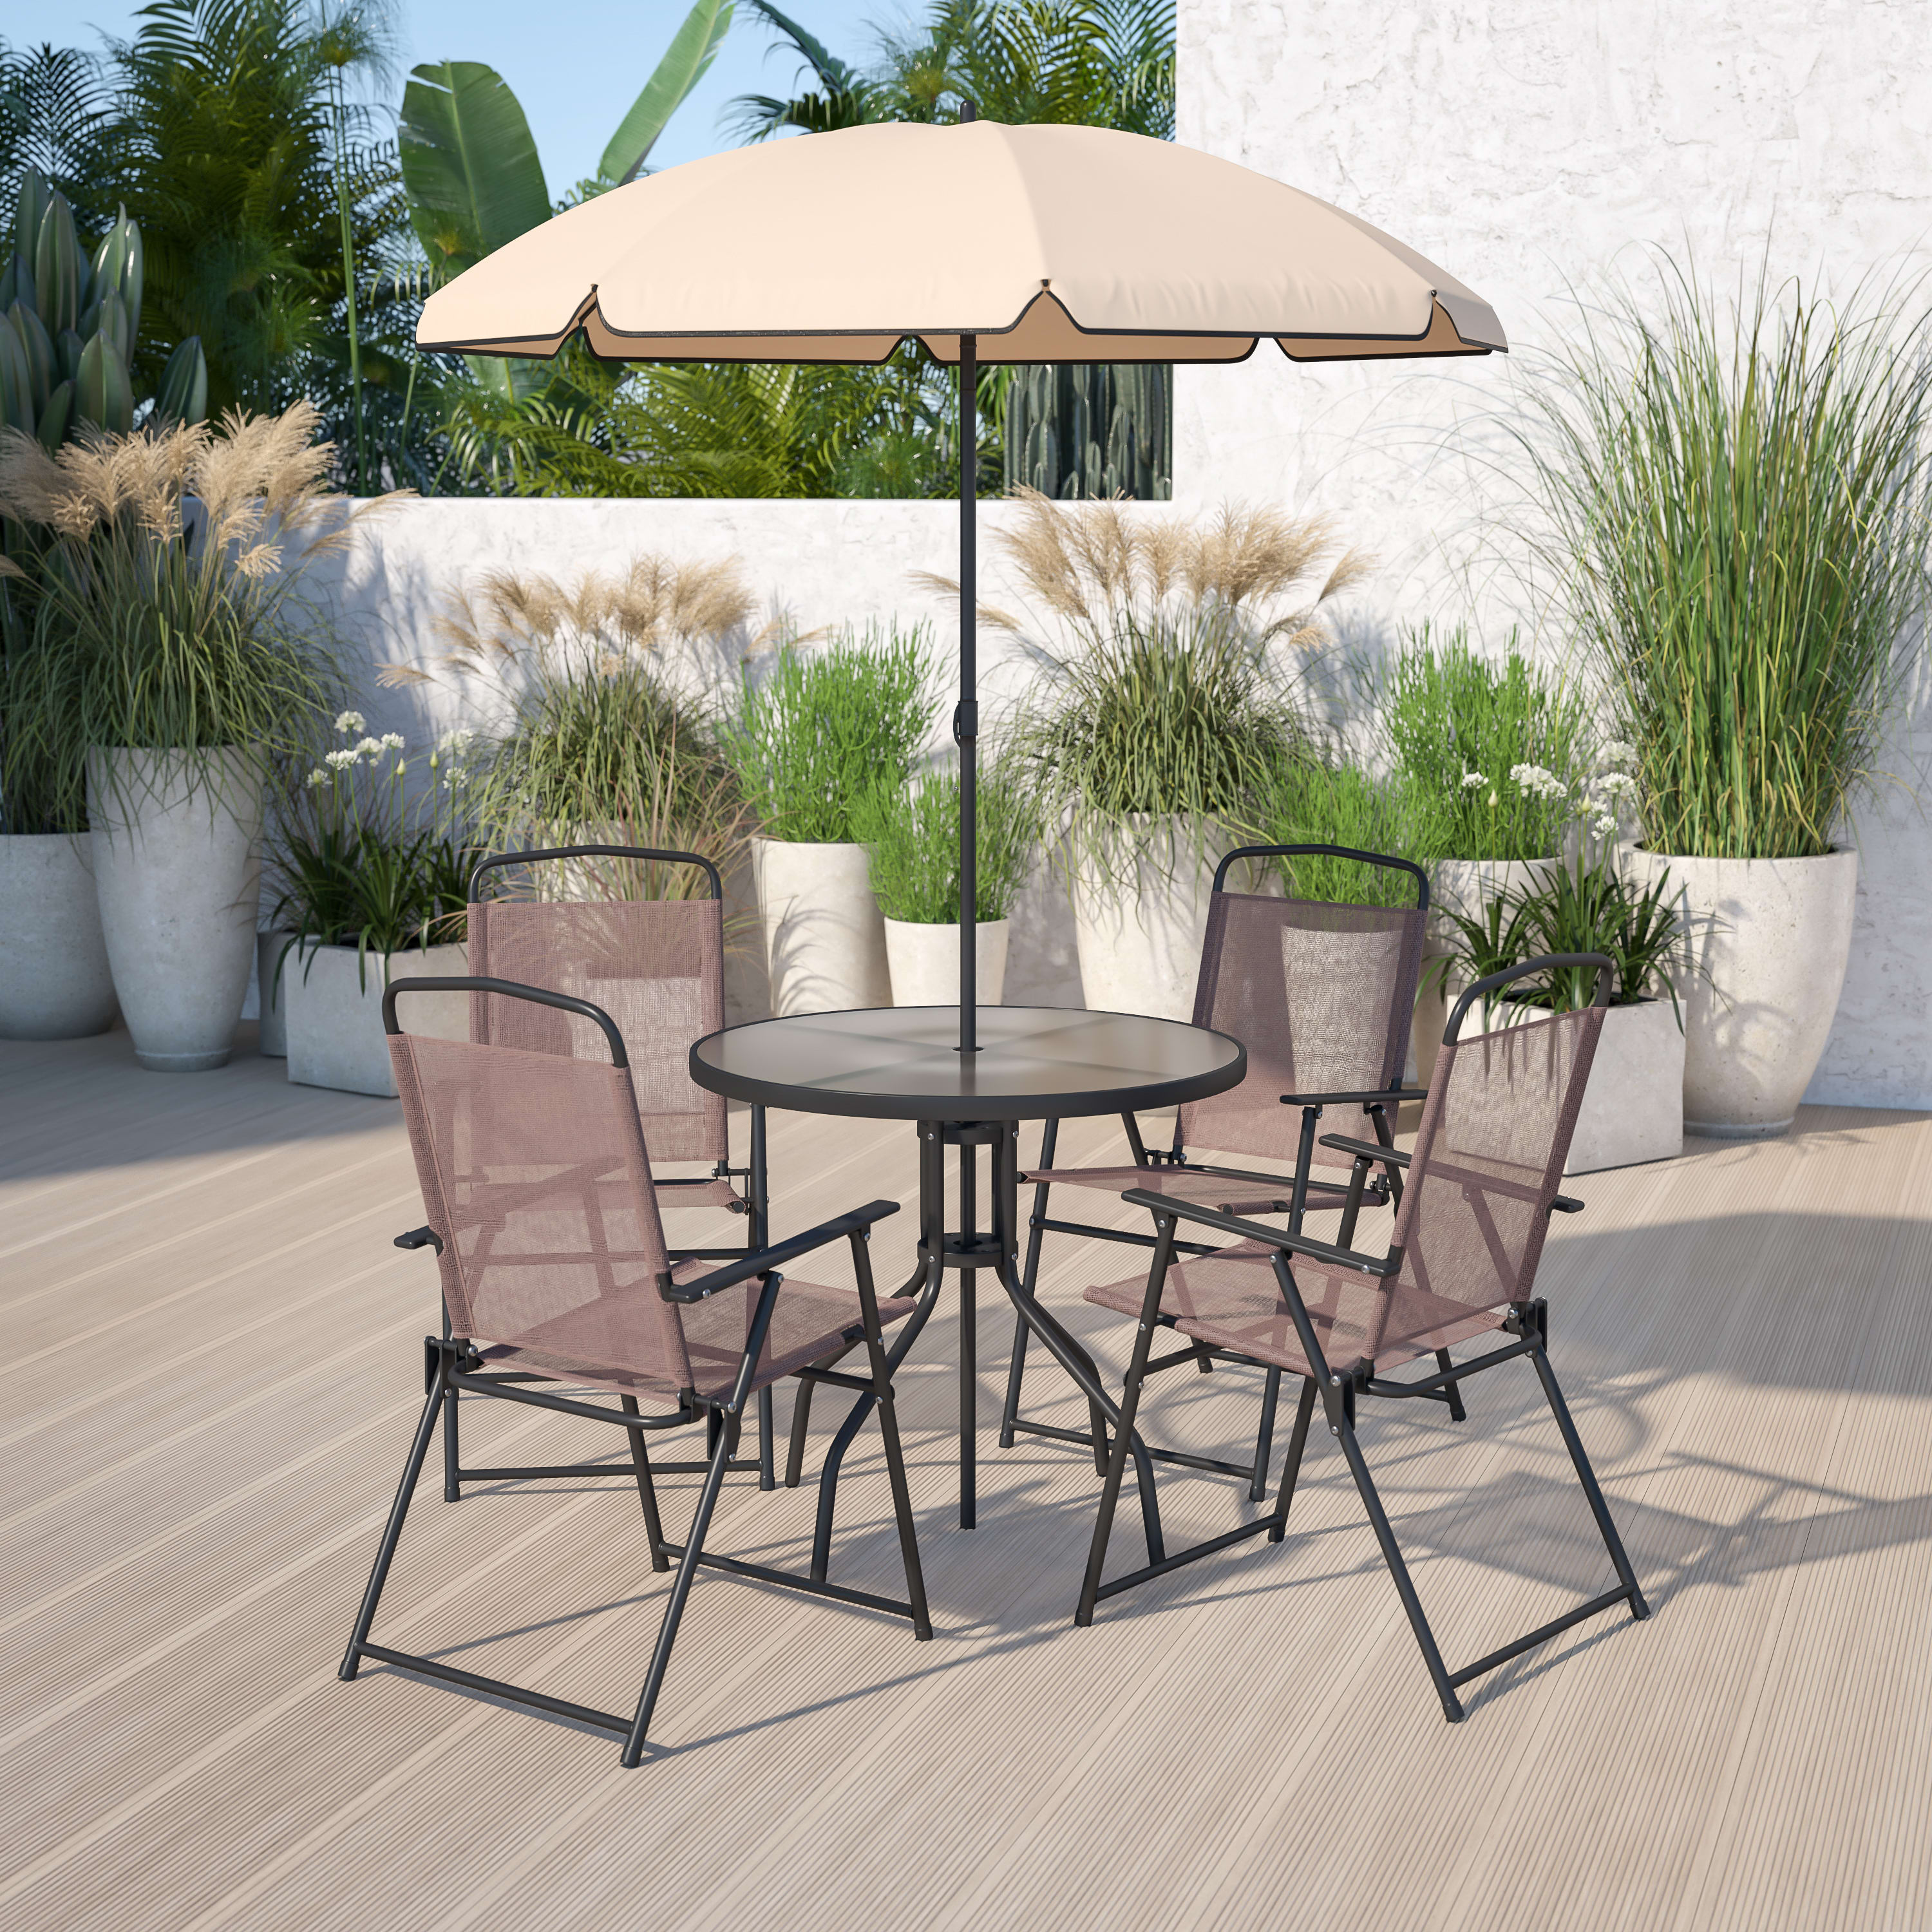 Flash Furniture Nantucket 6 Piece Brown Patio Garden Set with Umbrella Table and Set of 4 Folding Chairs - image 2 of 12